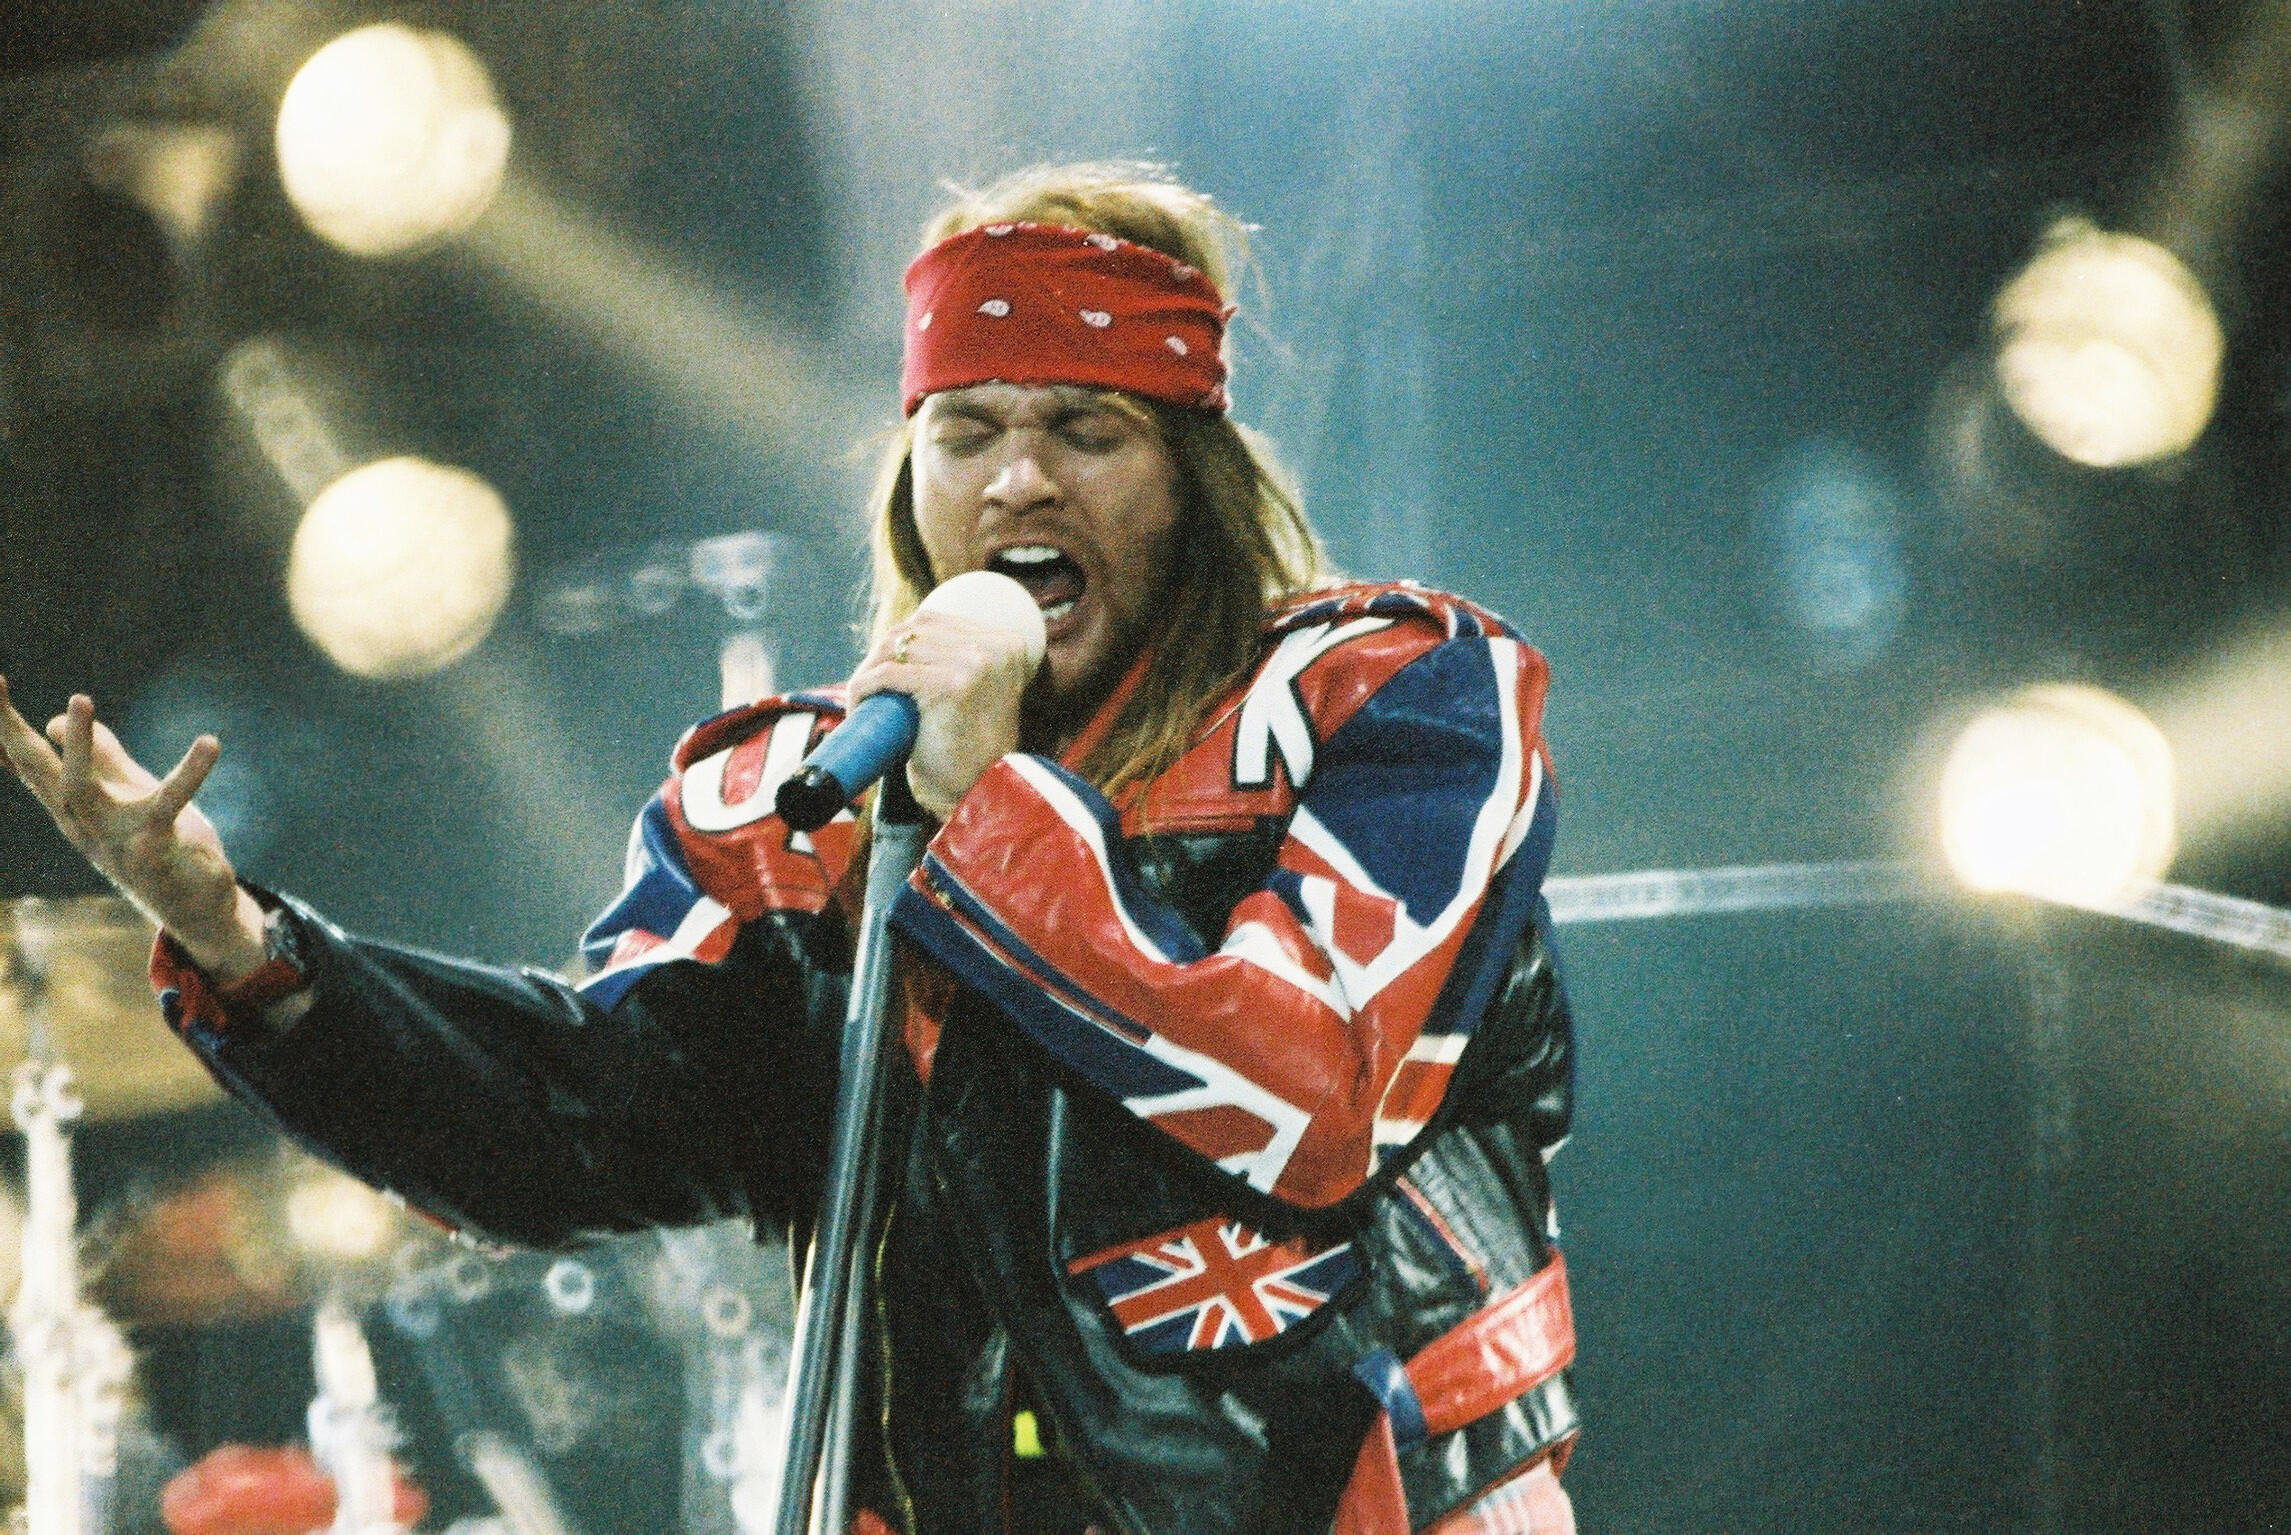 Is Axl Rose singing about Bloomington in Guns N' Roses' Paradise City?